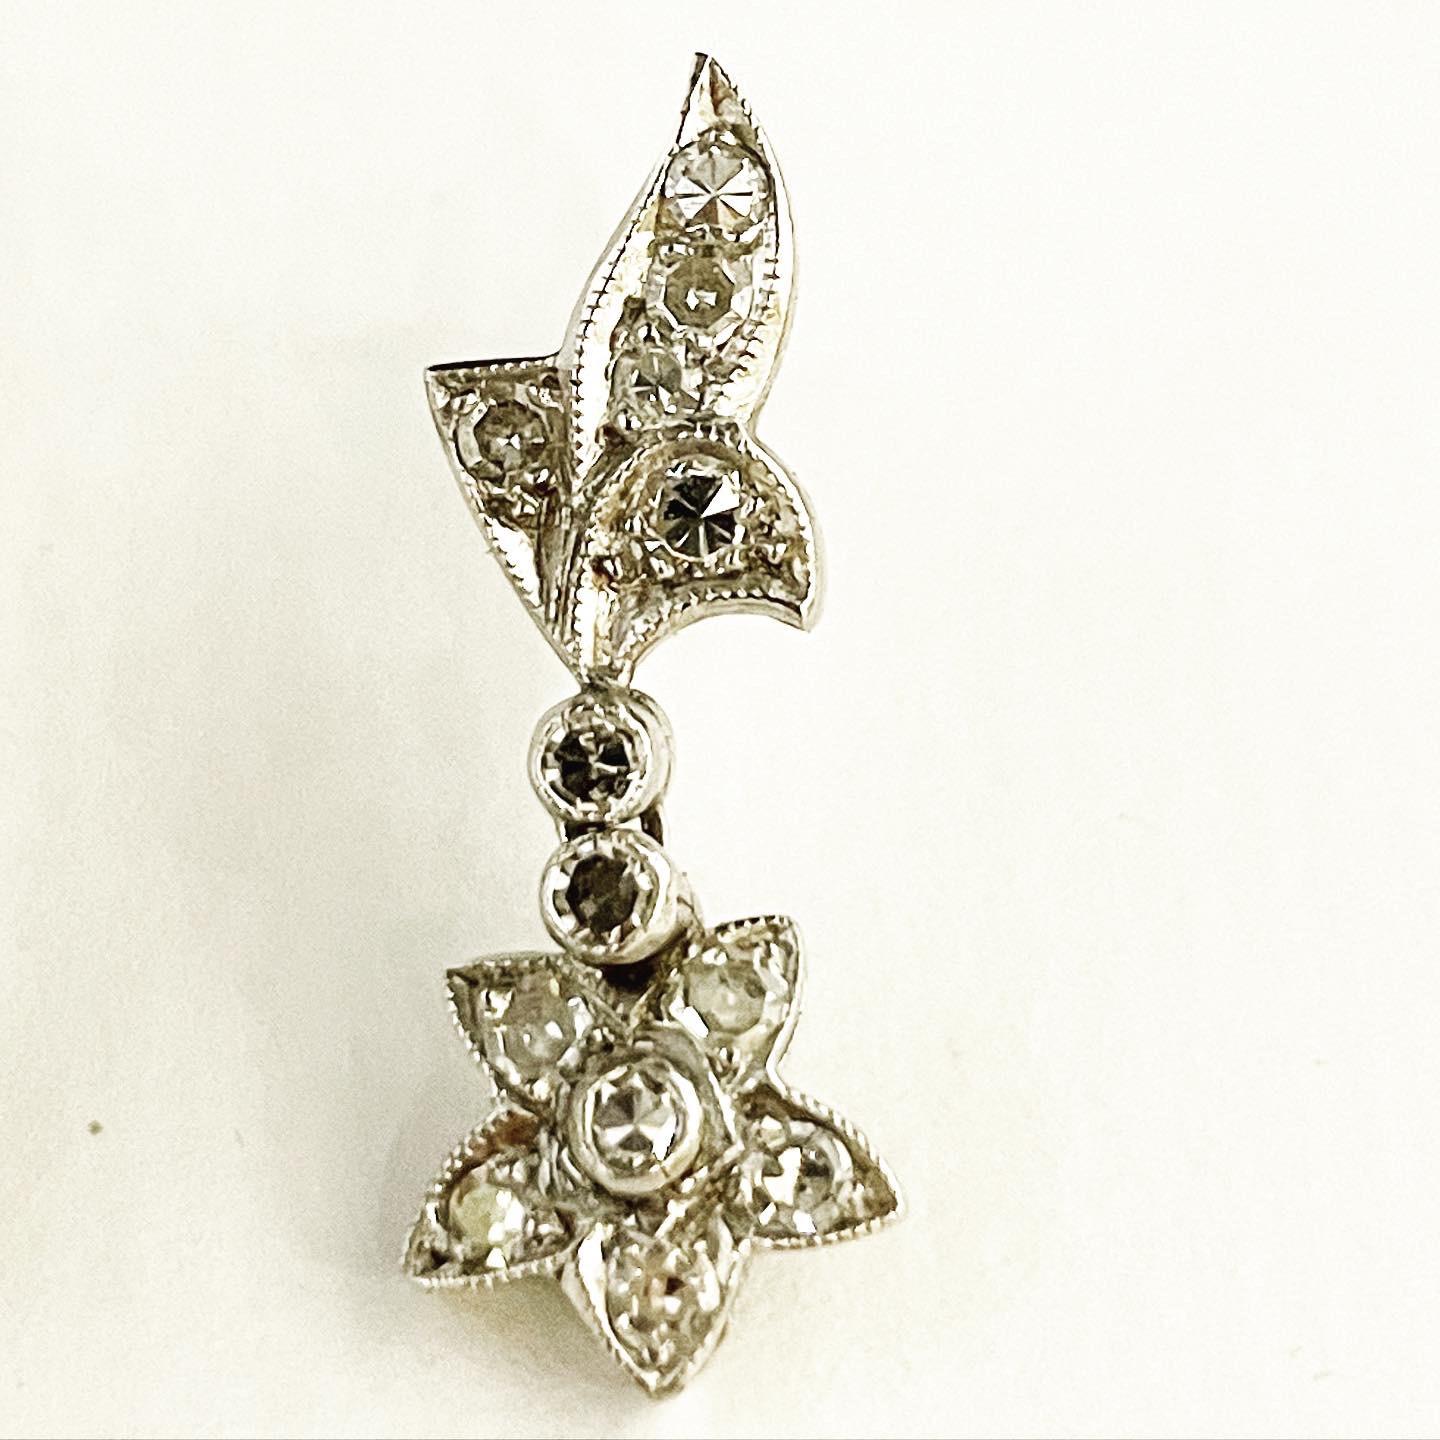 1930s flowers design with diamonds palladium drop stud earrings.

The earrings are finely crafted in paladium with diamonds.
Total approximate weight of the diamonds:  0.8 carat.
Total weight of the jewel: 4.5 g.

FREE SHIPPING.
RETURNS ACCEPTED (3